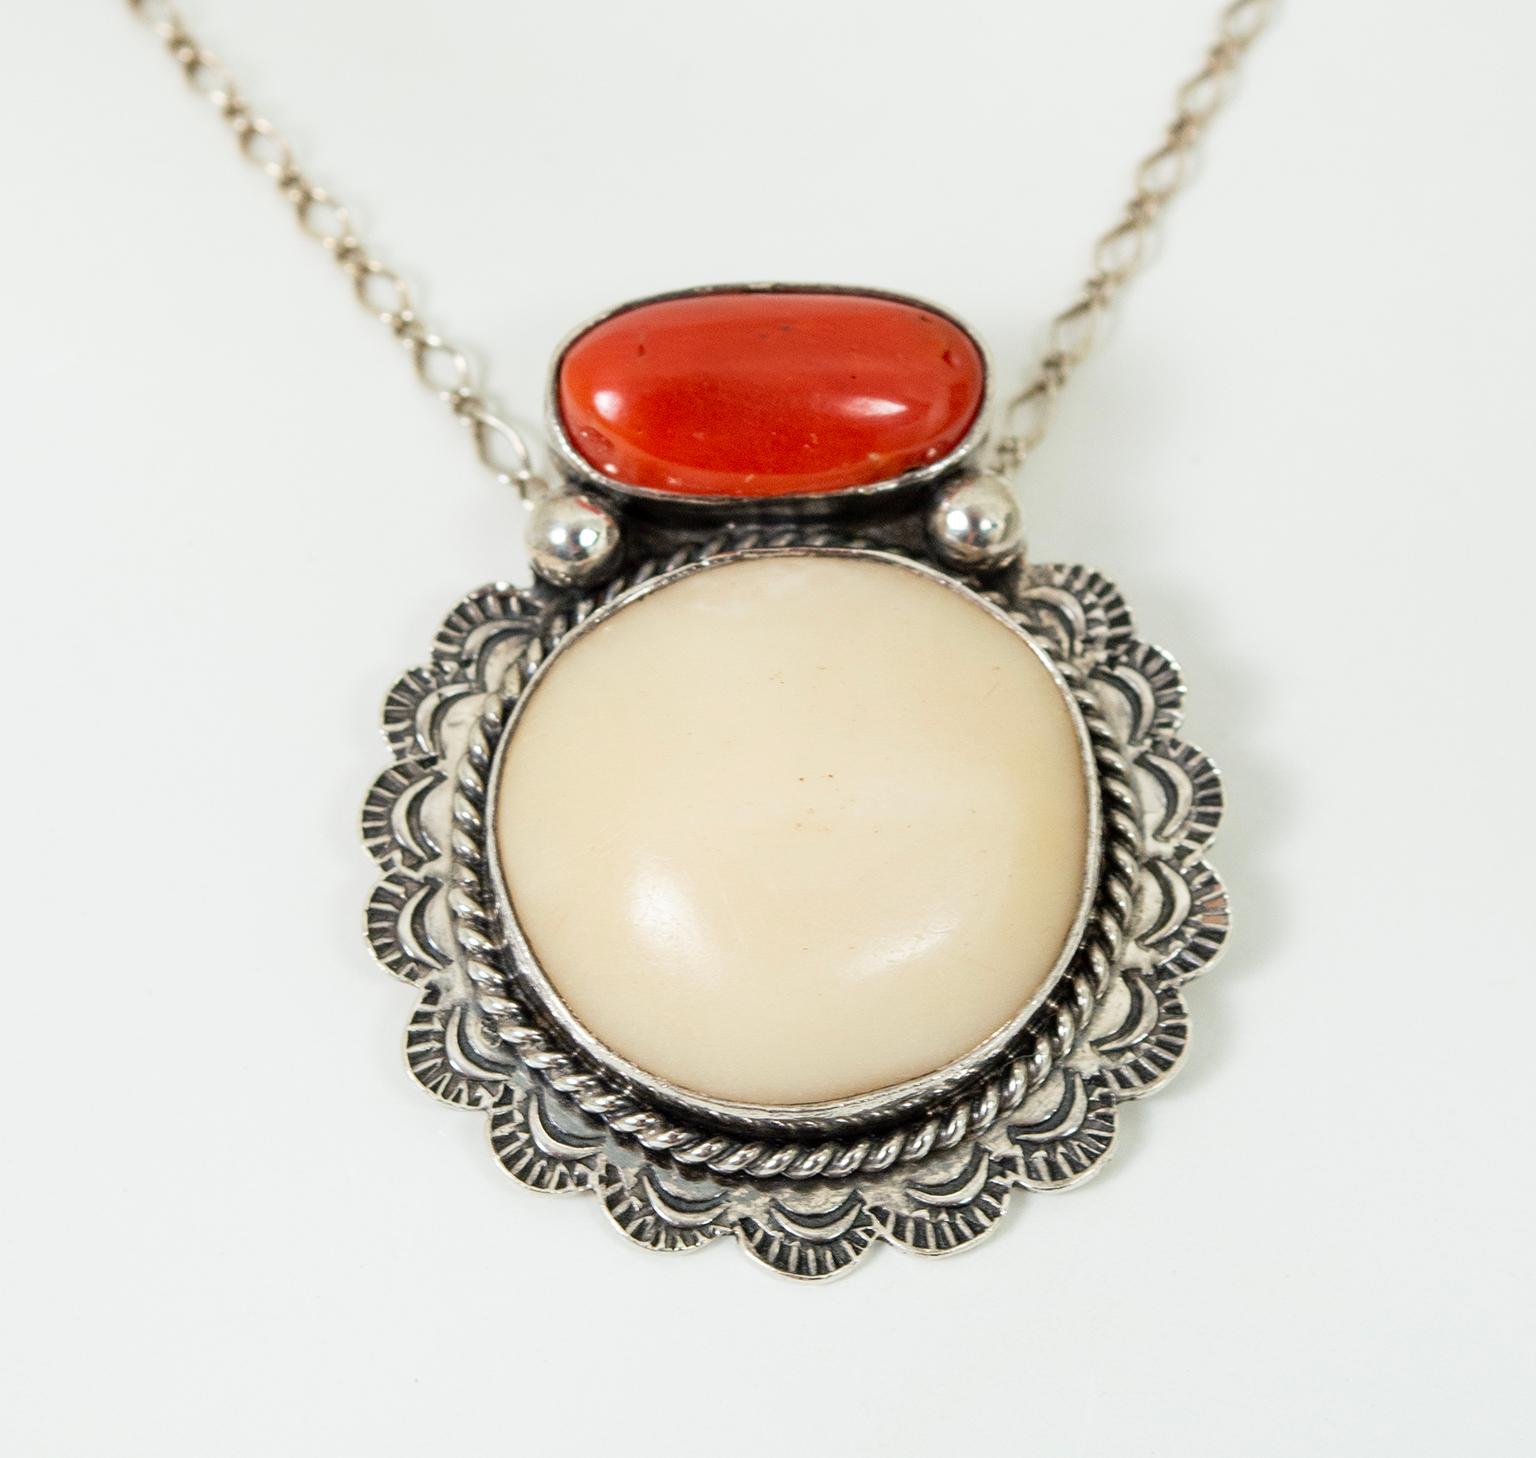 Anglo-Indian Signed Joan Slifka Navajo Sterling Coral and Bone Pendant Necklace - 16”, 1997 For Sale